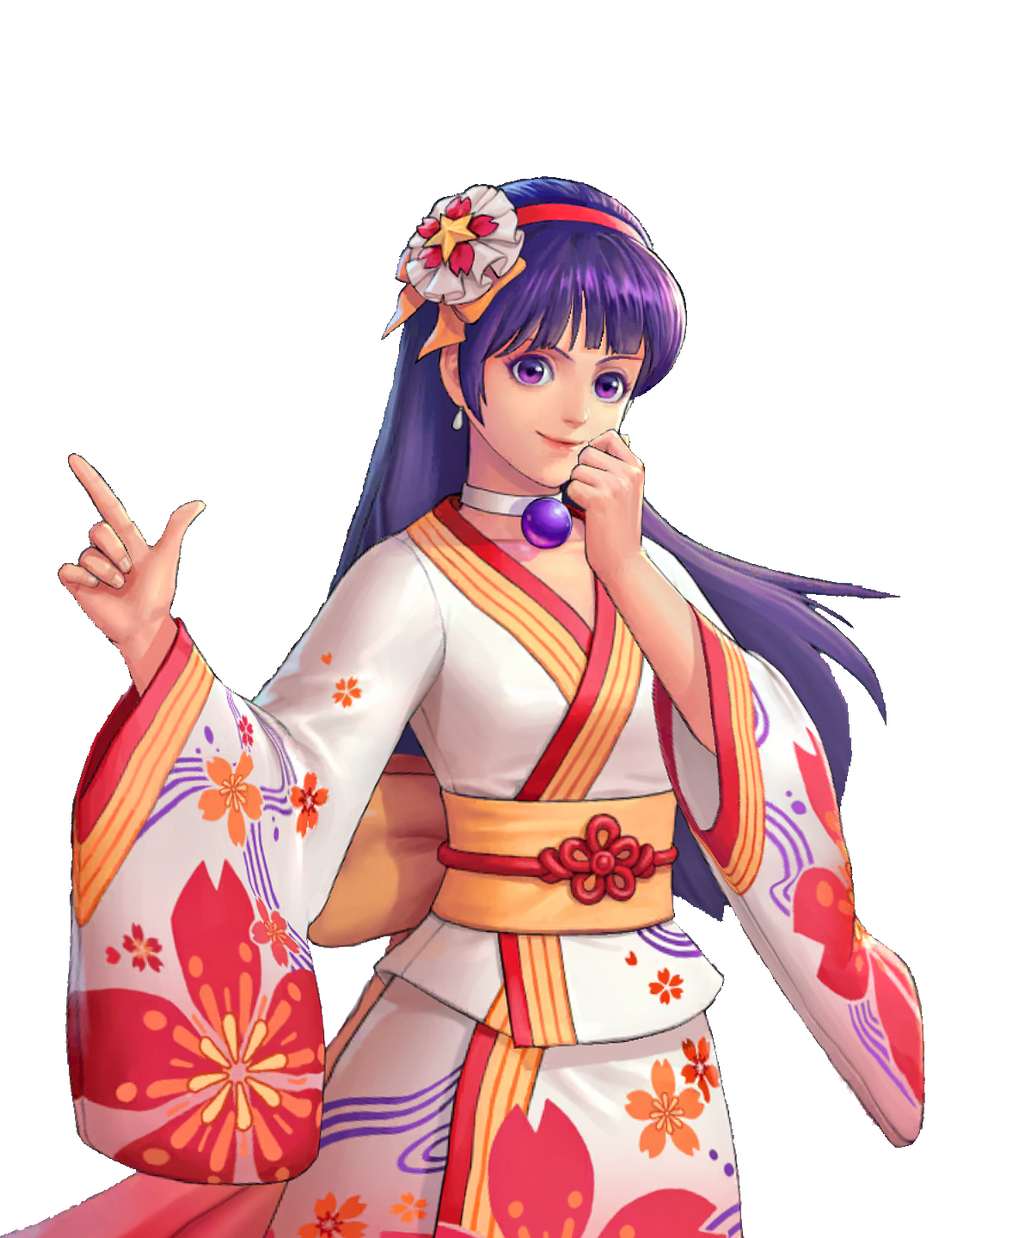 King Of Fighters All Star Athena Asamiya By Hes6789 On Deviantart